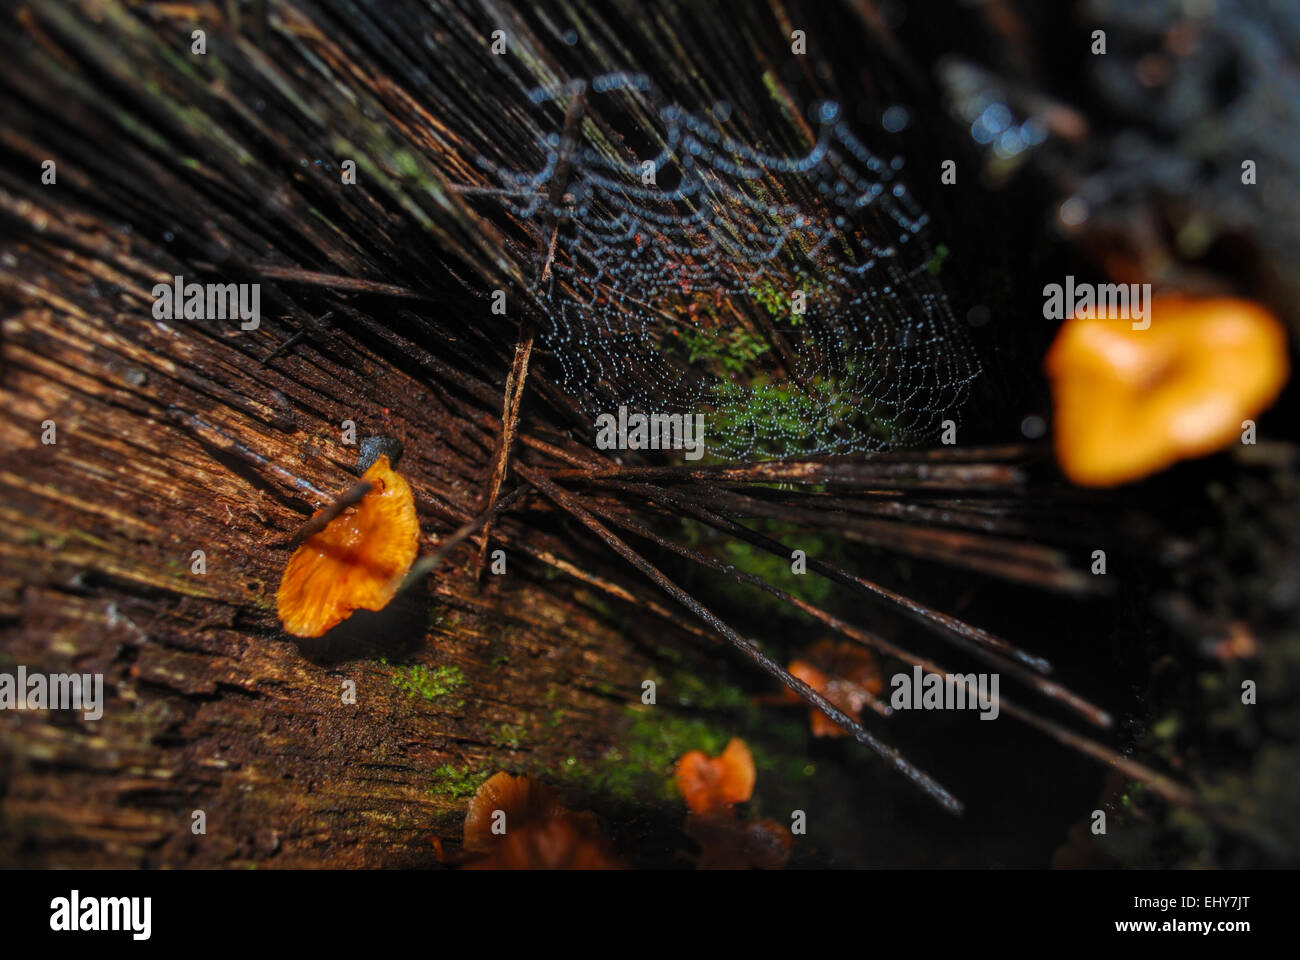 Spiderweb covered in water drops in between orange mushrooms near the forest floor in Bolivia Stock Photo